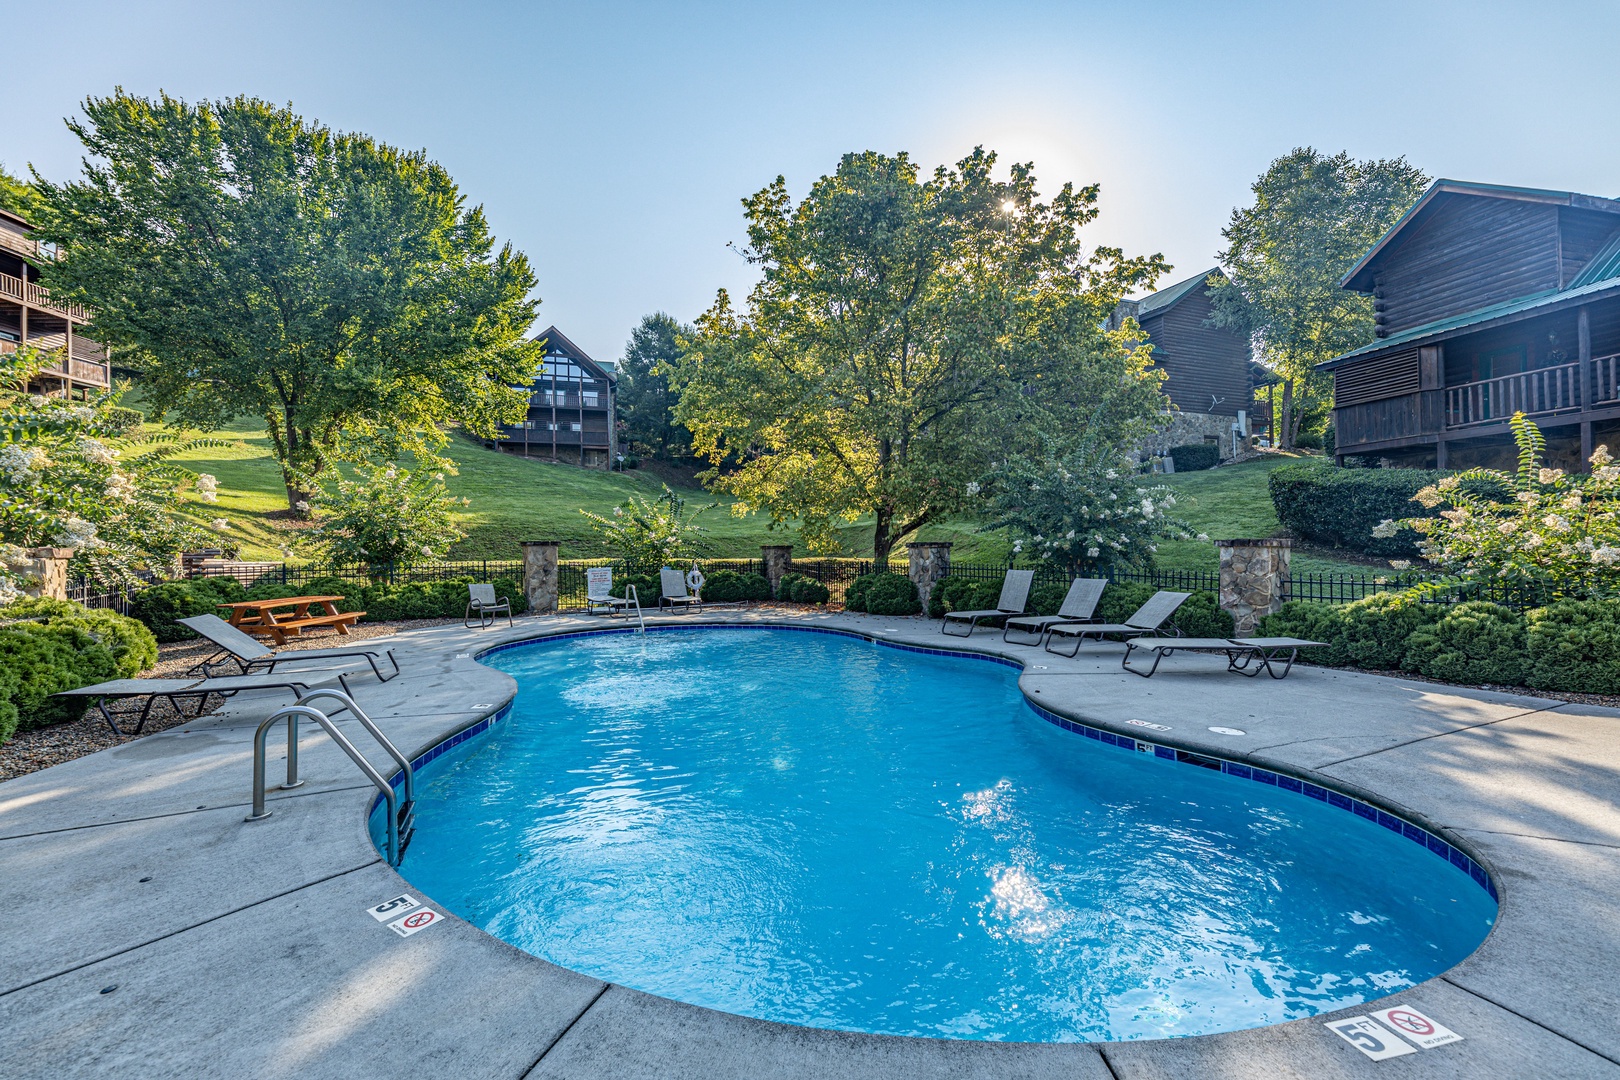 Pool access for guests at Family Getaway, a 4 bedroom cabin rental located in Pigeon Forge